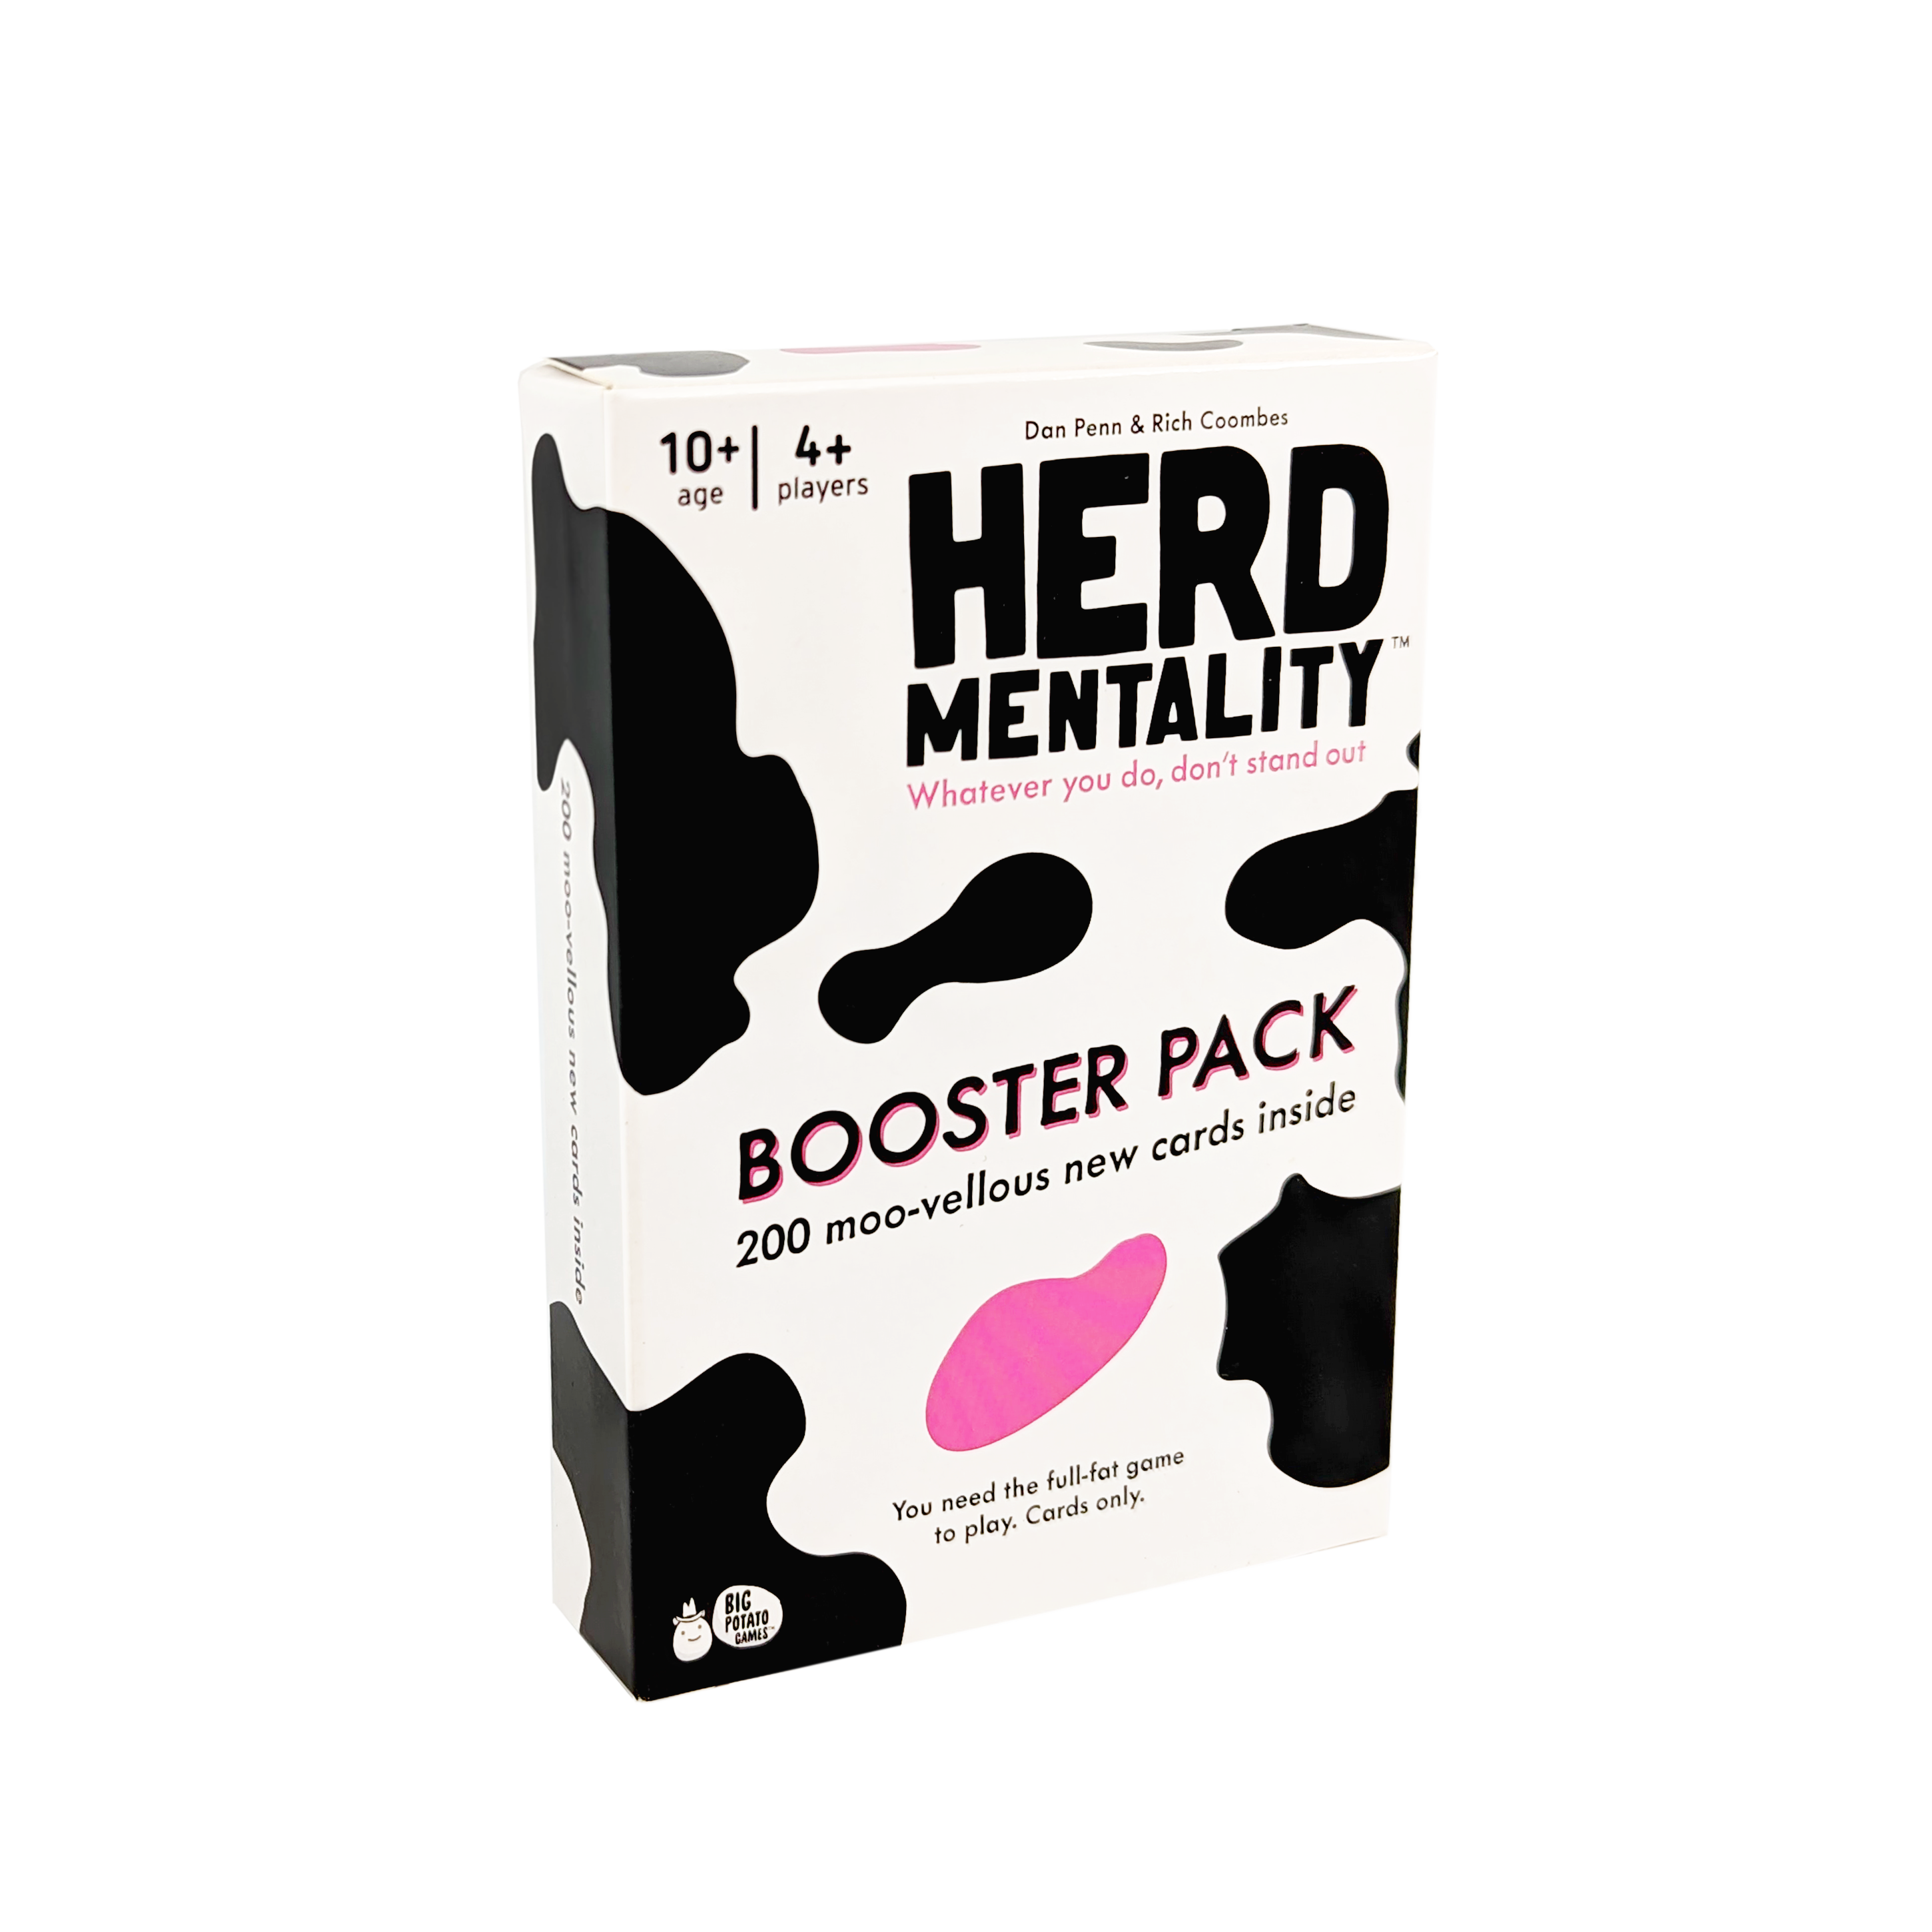 Herd Mentality Booster Pack game box